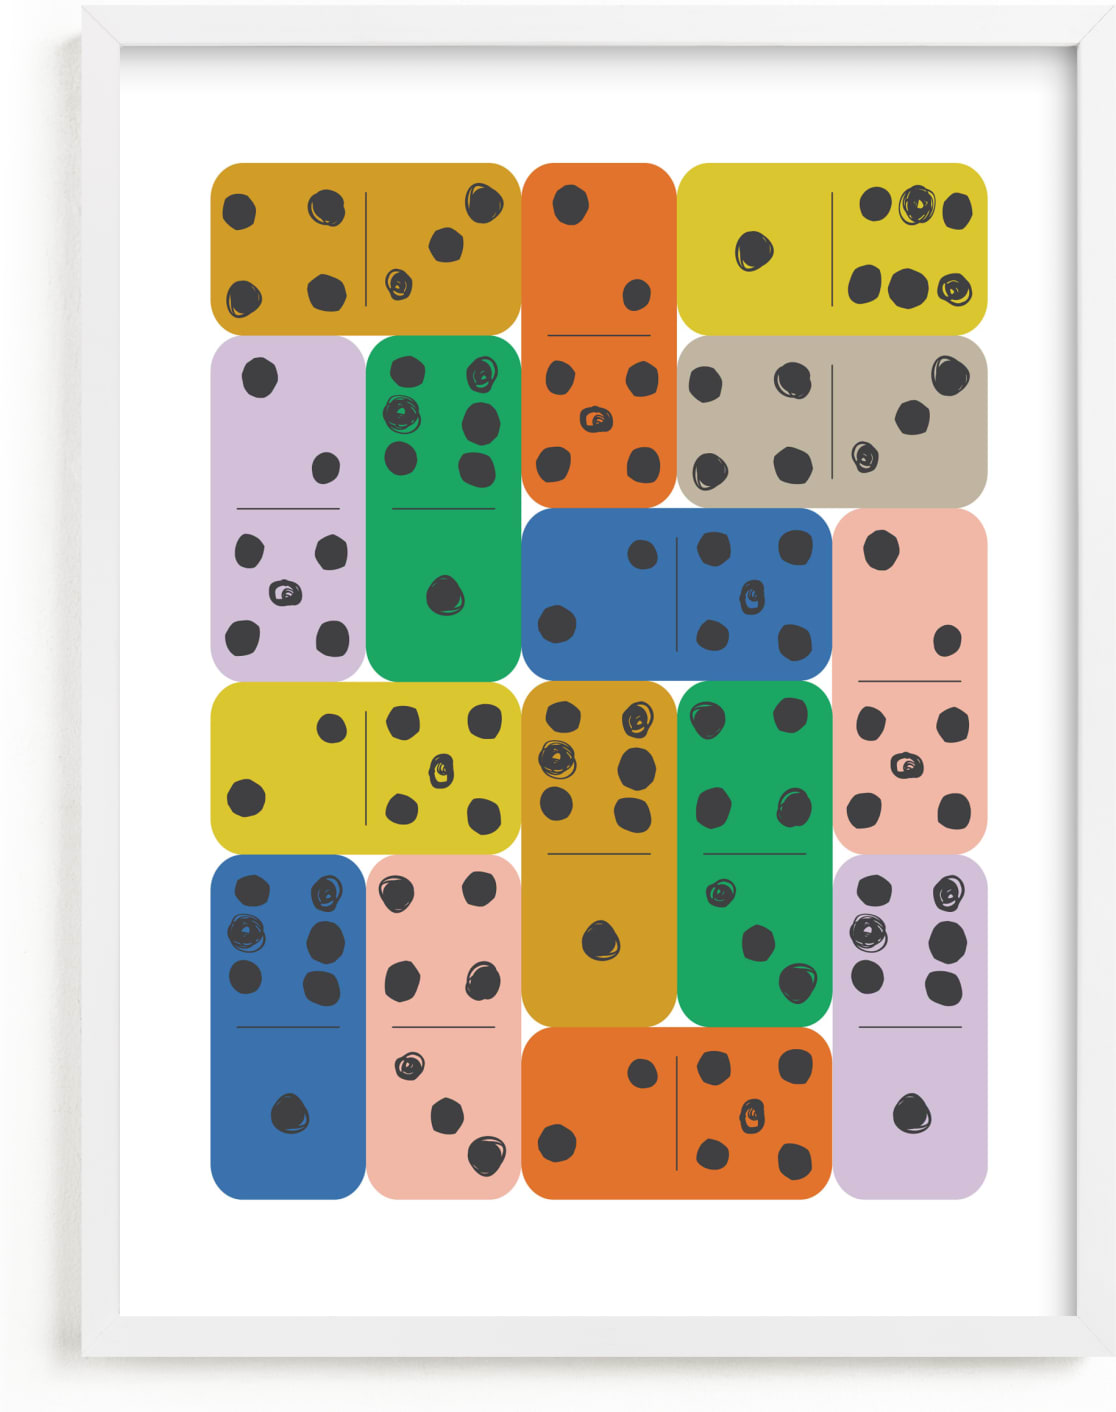 This is a blue kids wall art by Ampersand Design Studio called Fun & Games I.